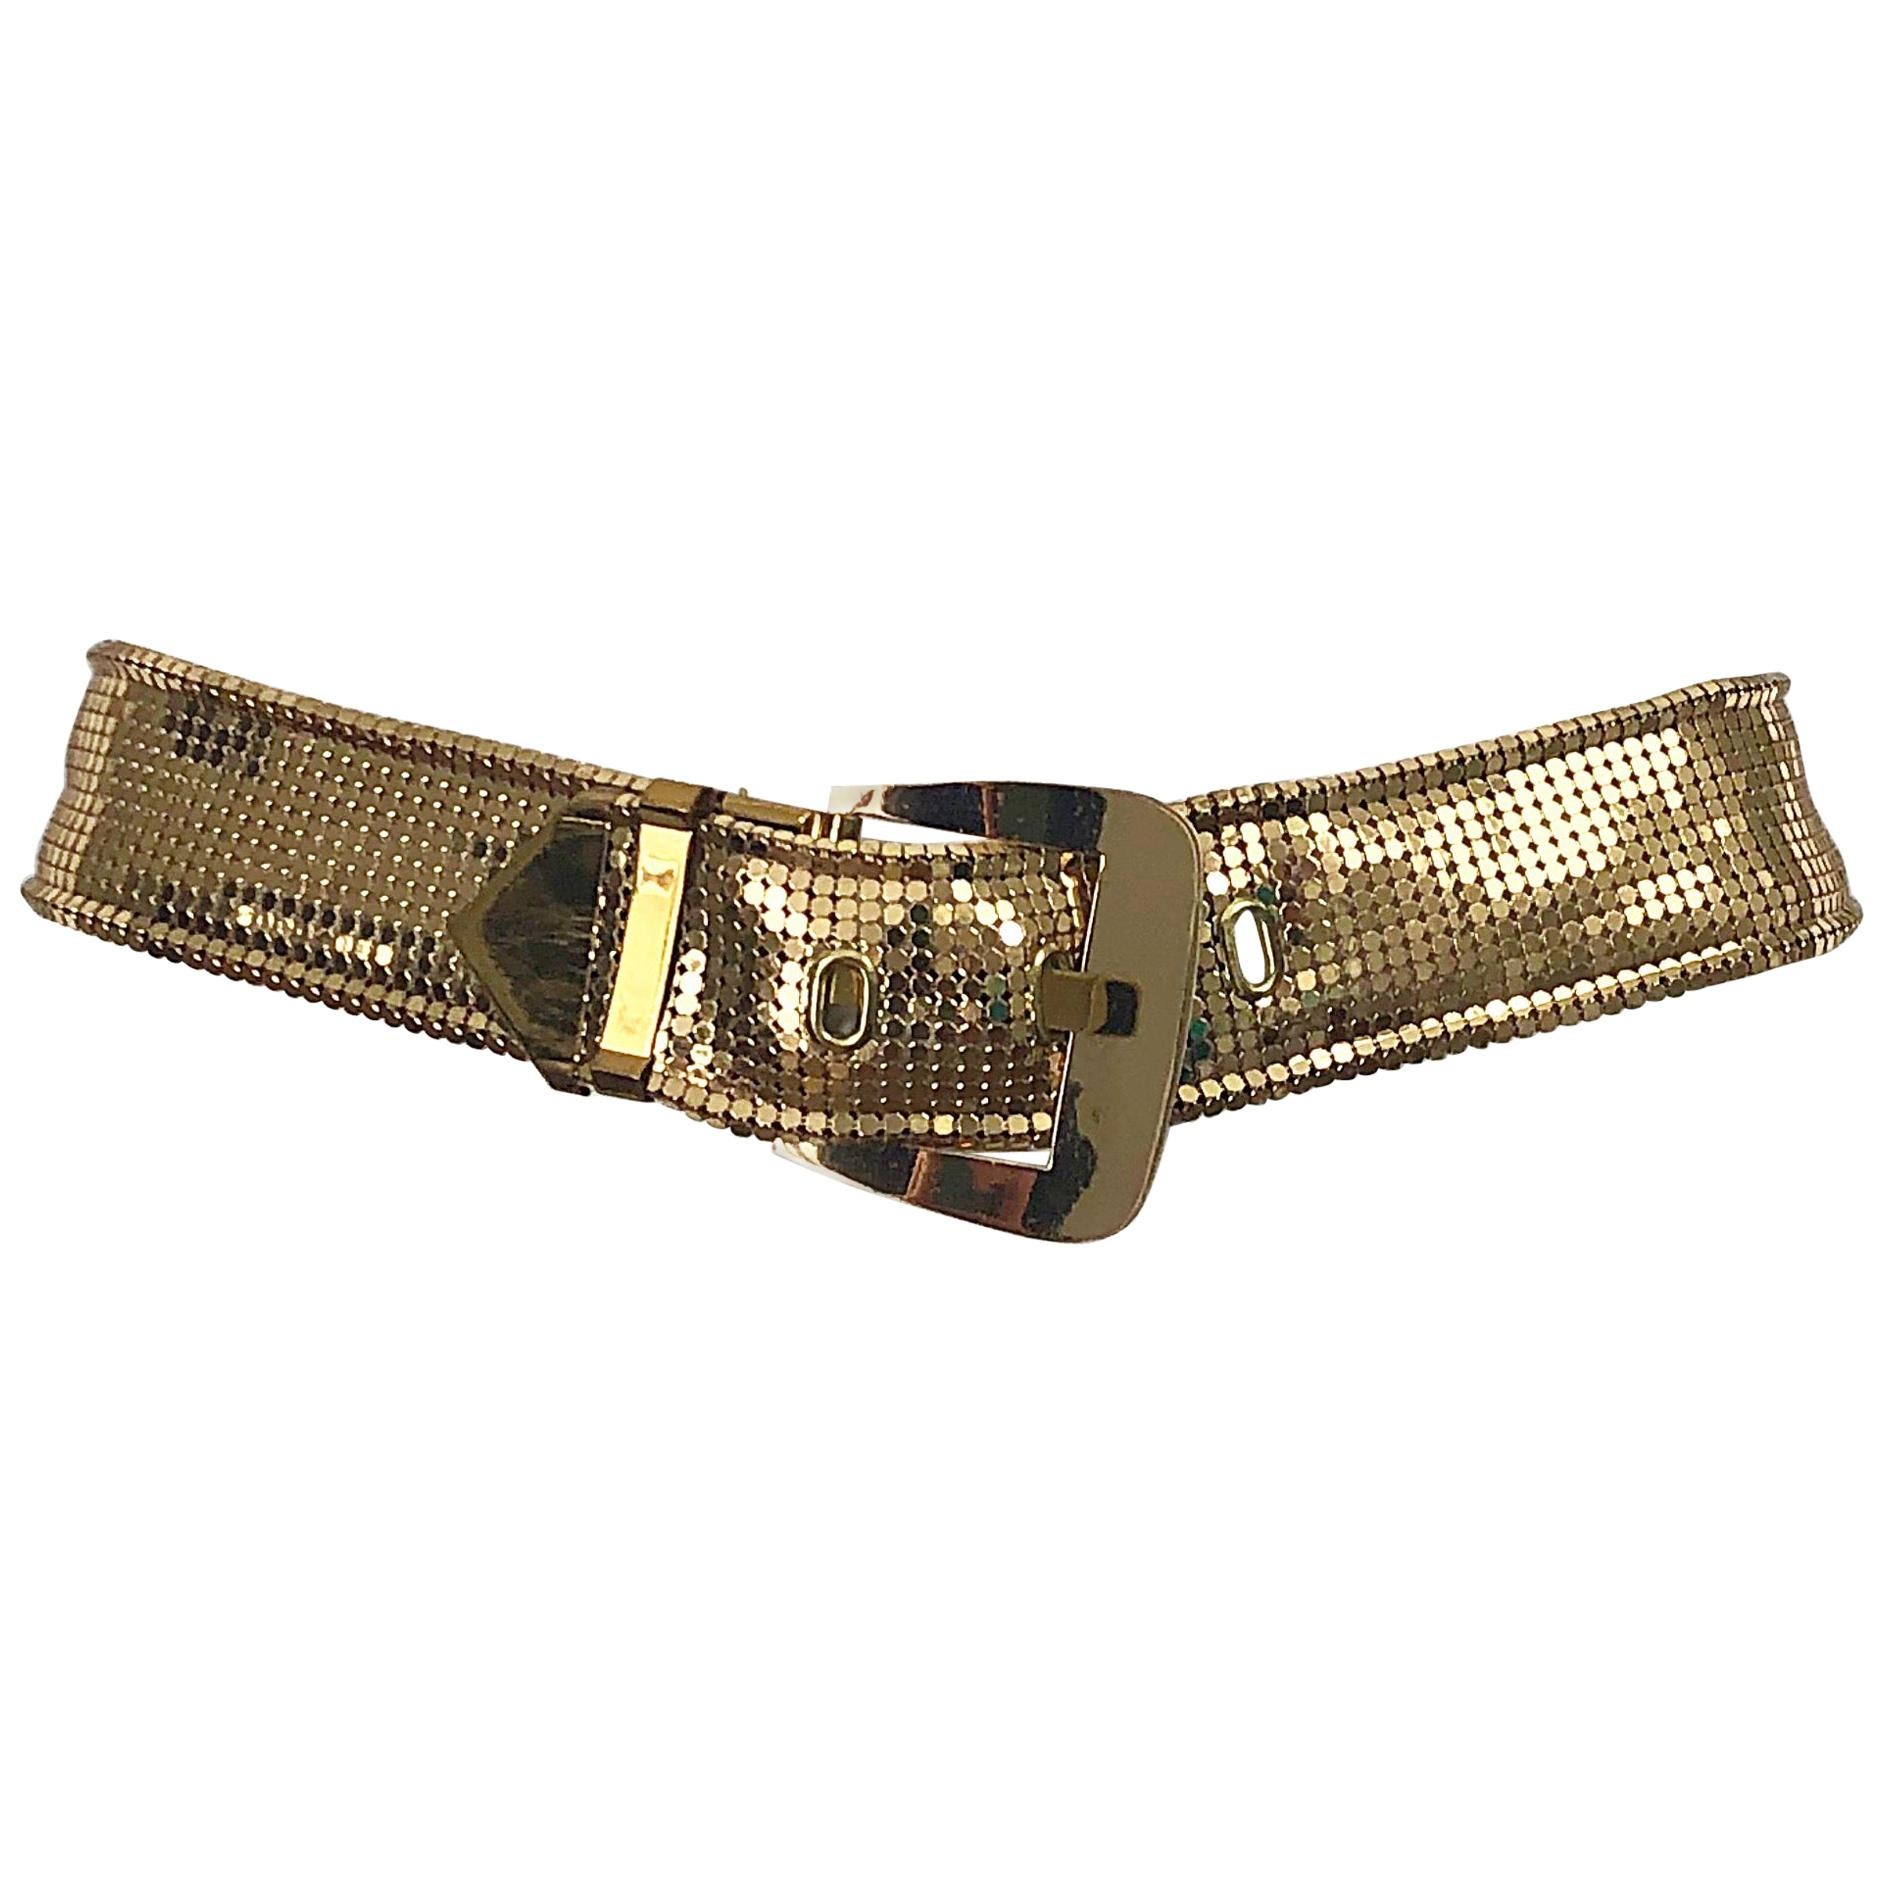 Whiting and Davis 1980s Gold Metal Chainmail Vintage Metallic 80s Belt